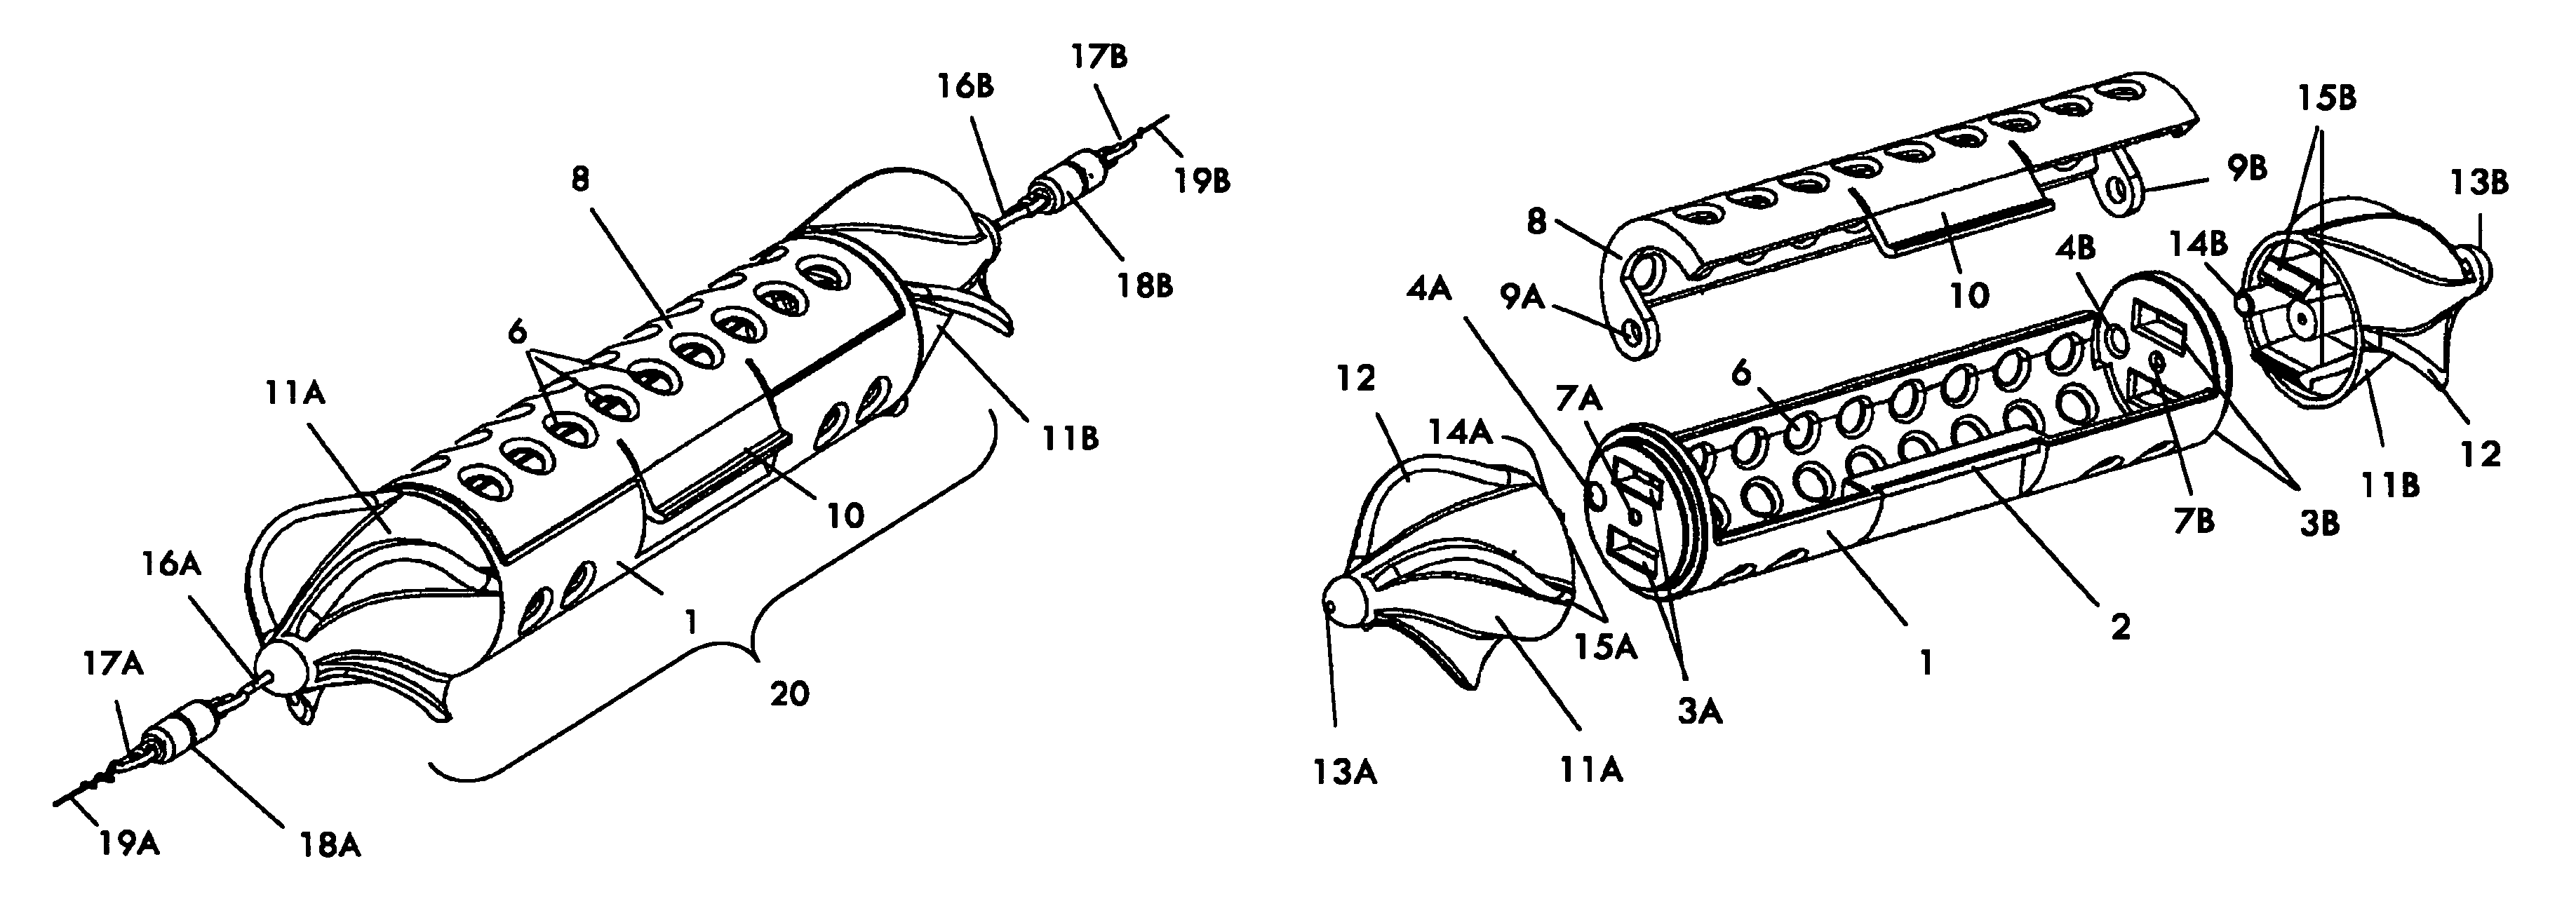 Device for in-line, rotating chum and/or fish scent dispenser